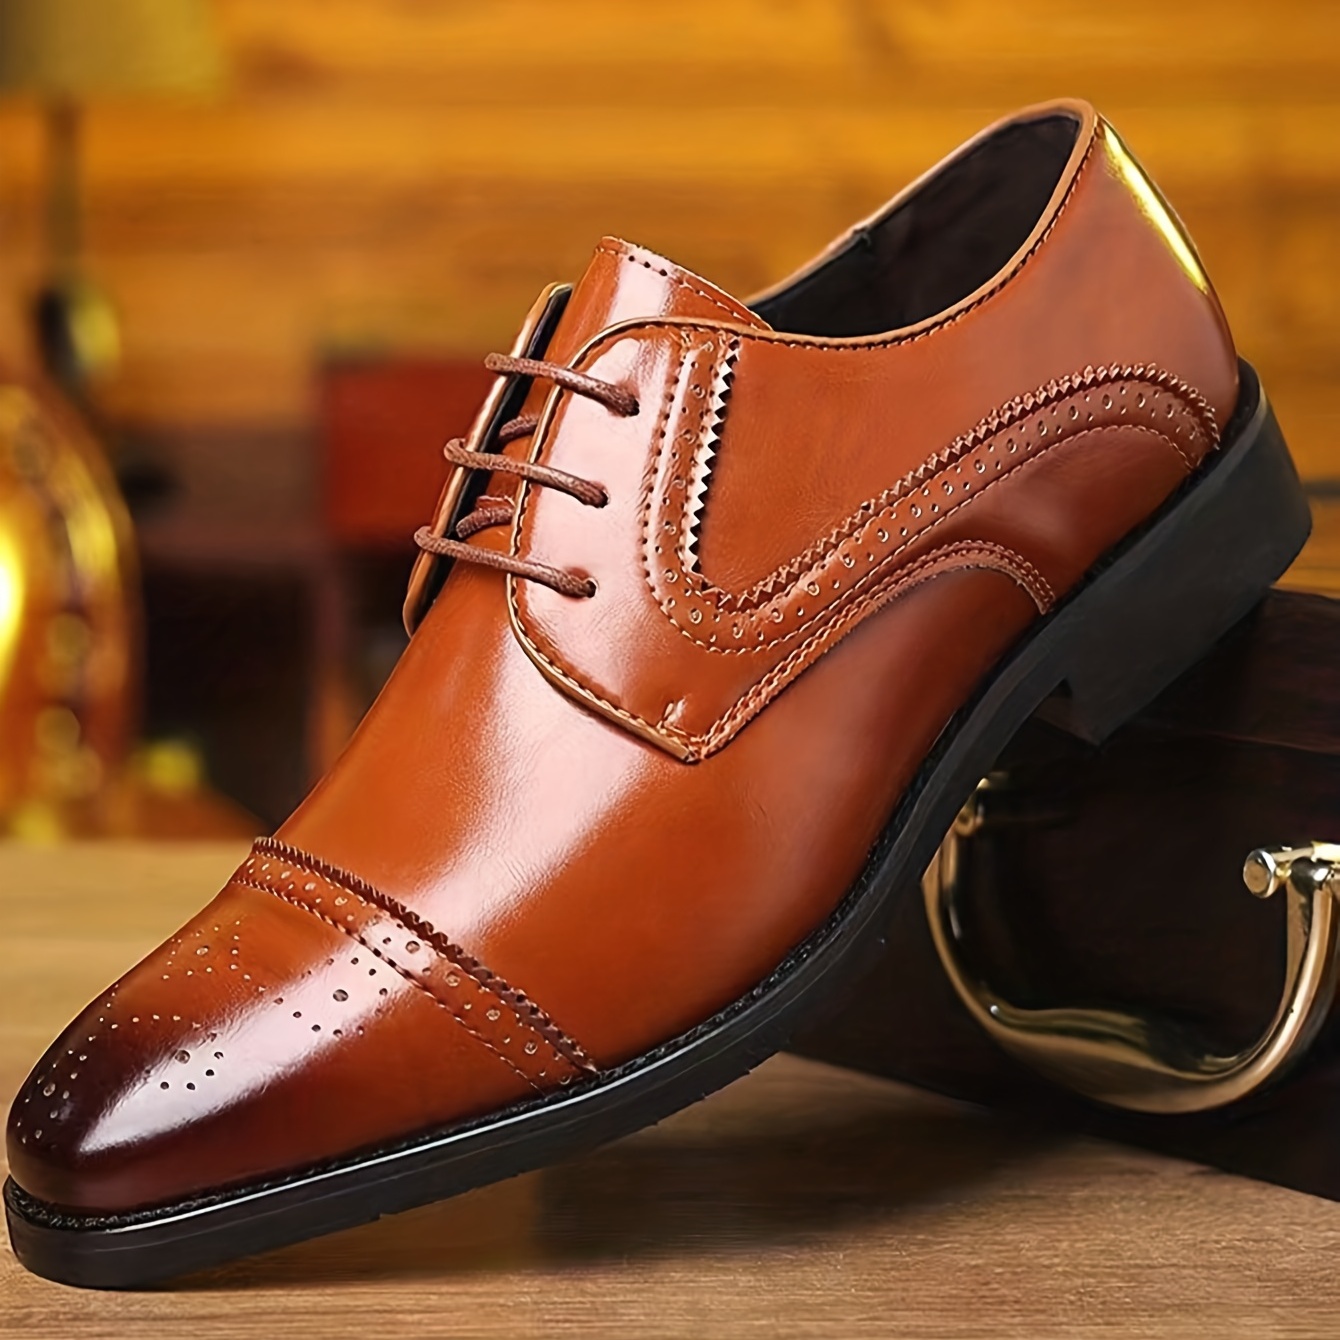  Men's Single Shoes,Pointed Loafers Shoes Breathable Leather  Wedding Shoes Fashion Slip On Business Formal Casual Shoes Large  Size,Brown-40 : Clothing, Shoes & Jewelry